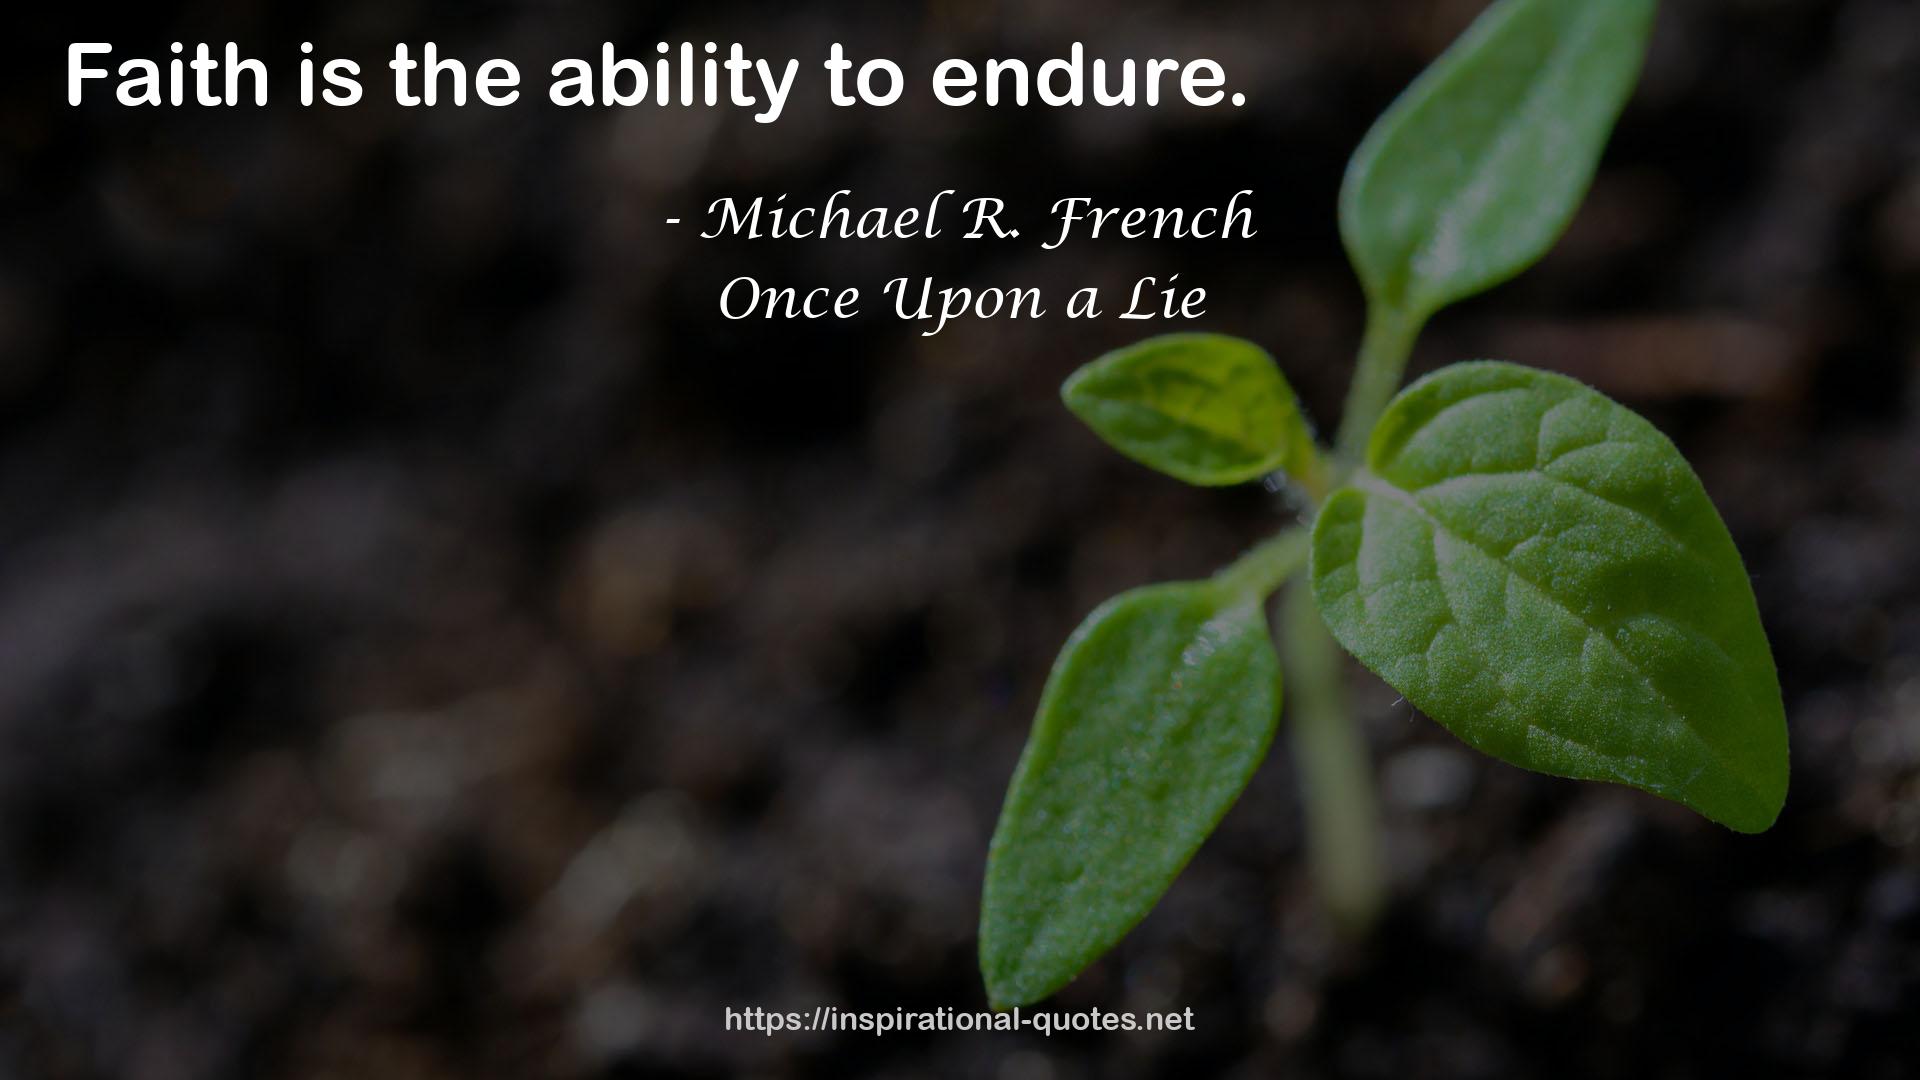 Michael R. French QUOTES